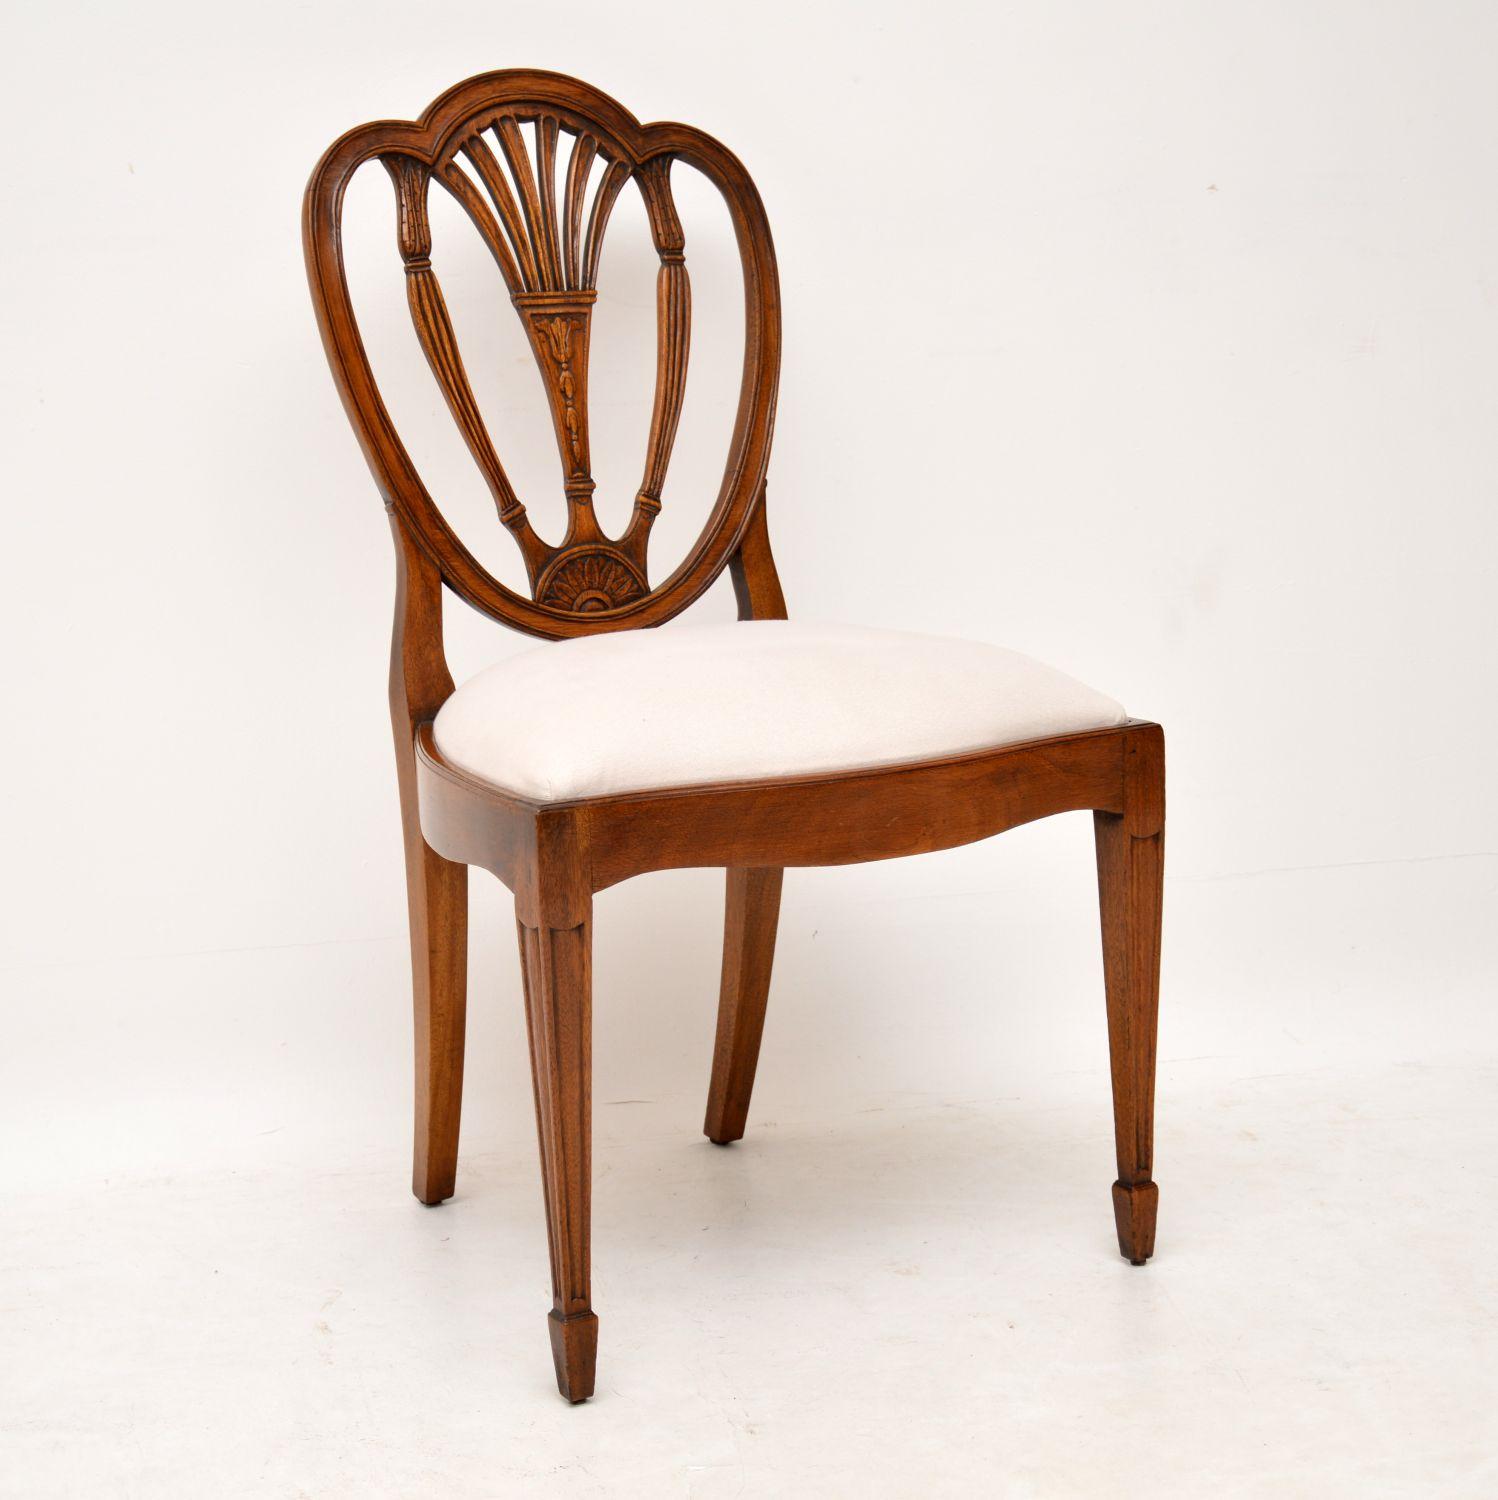 This set of six antique mahogany dining chairs are of high quality and have nicely shaped backs with intricate carvings all-over. They are in excellent condition, having just been French polished and have a lovely warm color. The back legs are swept